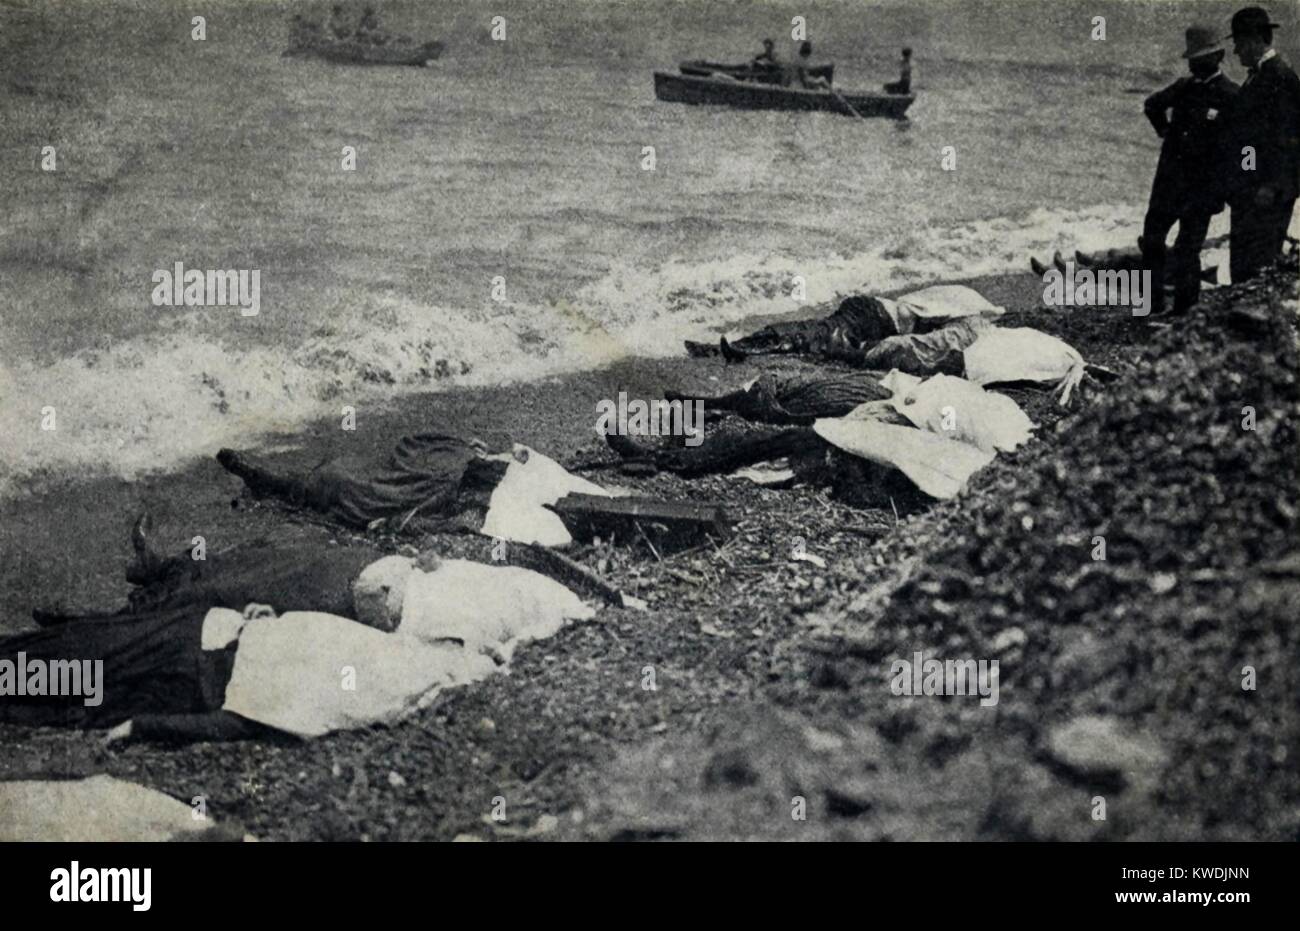 GENERAL SLOCUM excursion boat disaster in New York City, June 15, 1904. Dead bodies on the shore of North Brother Island in the East River. They were brought to the surface of the water by a cannonade of dynamite near where the excursion steamer was sunk (BSLOC 2017 17 112) Stock Photo